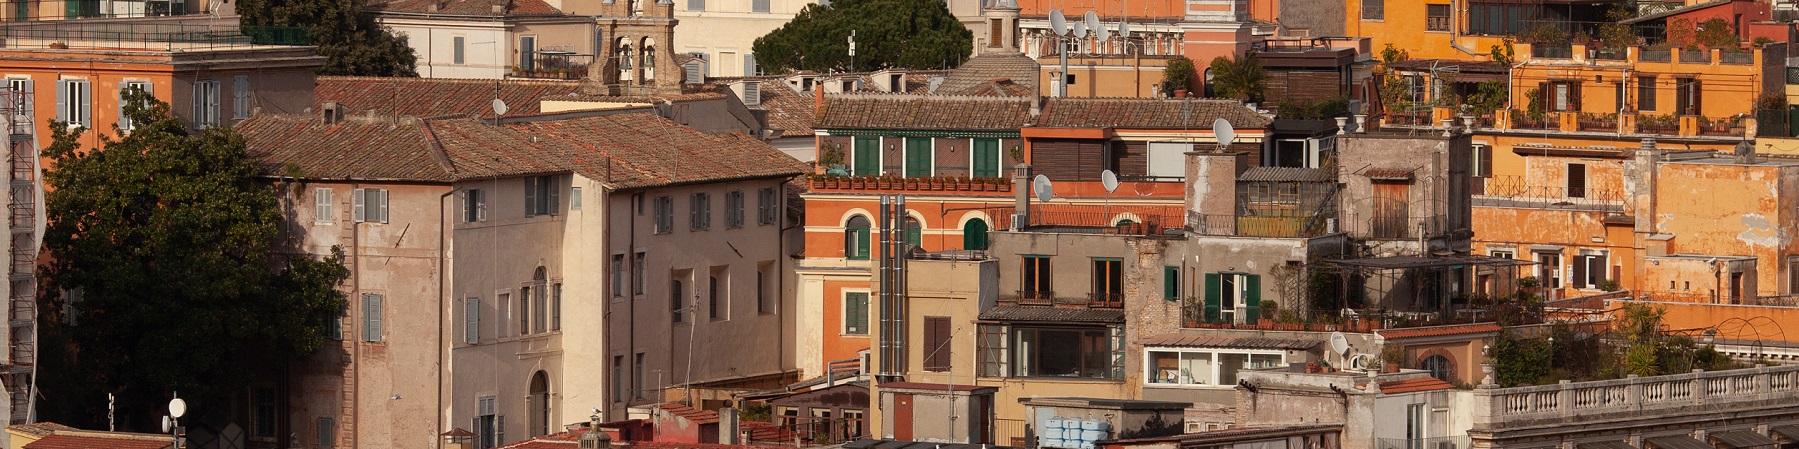 Rooftops in Rome